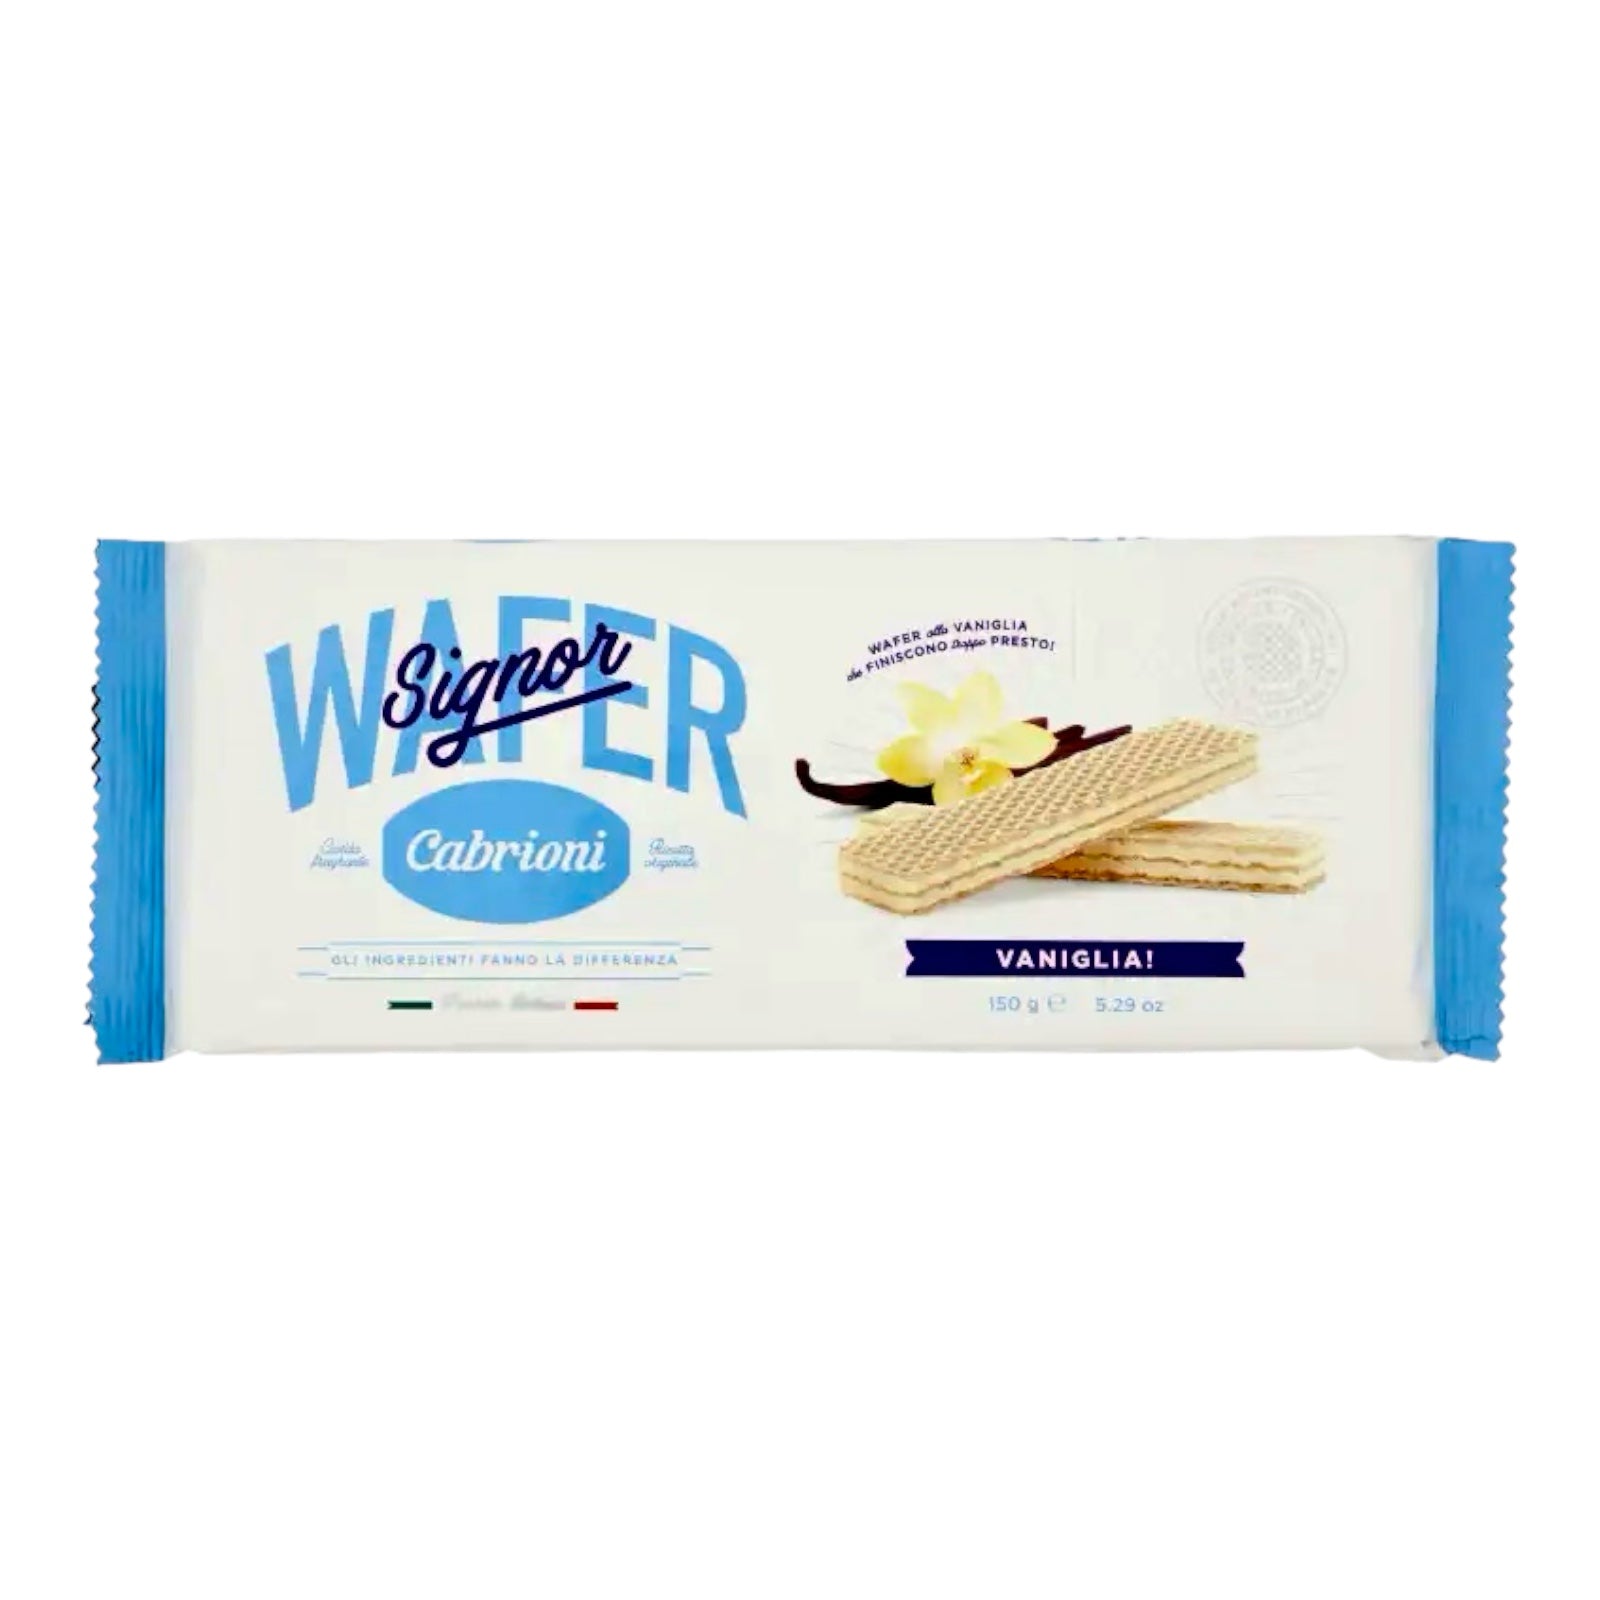 Wafers With Vanilla Cream By Cabrioni 150g